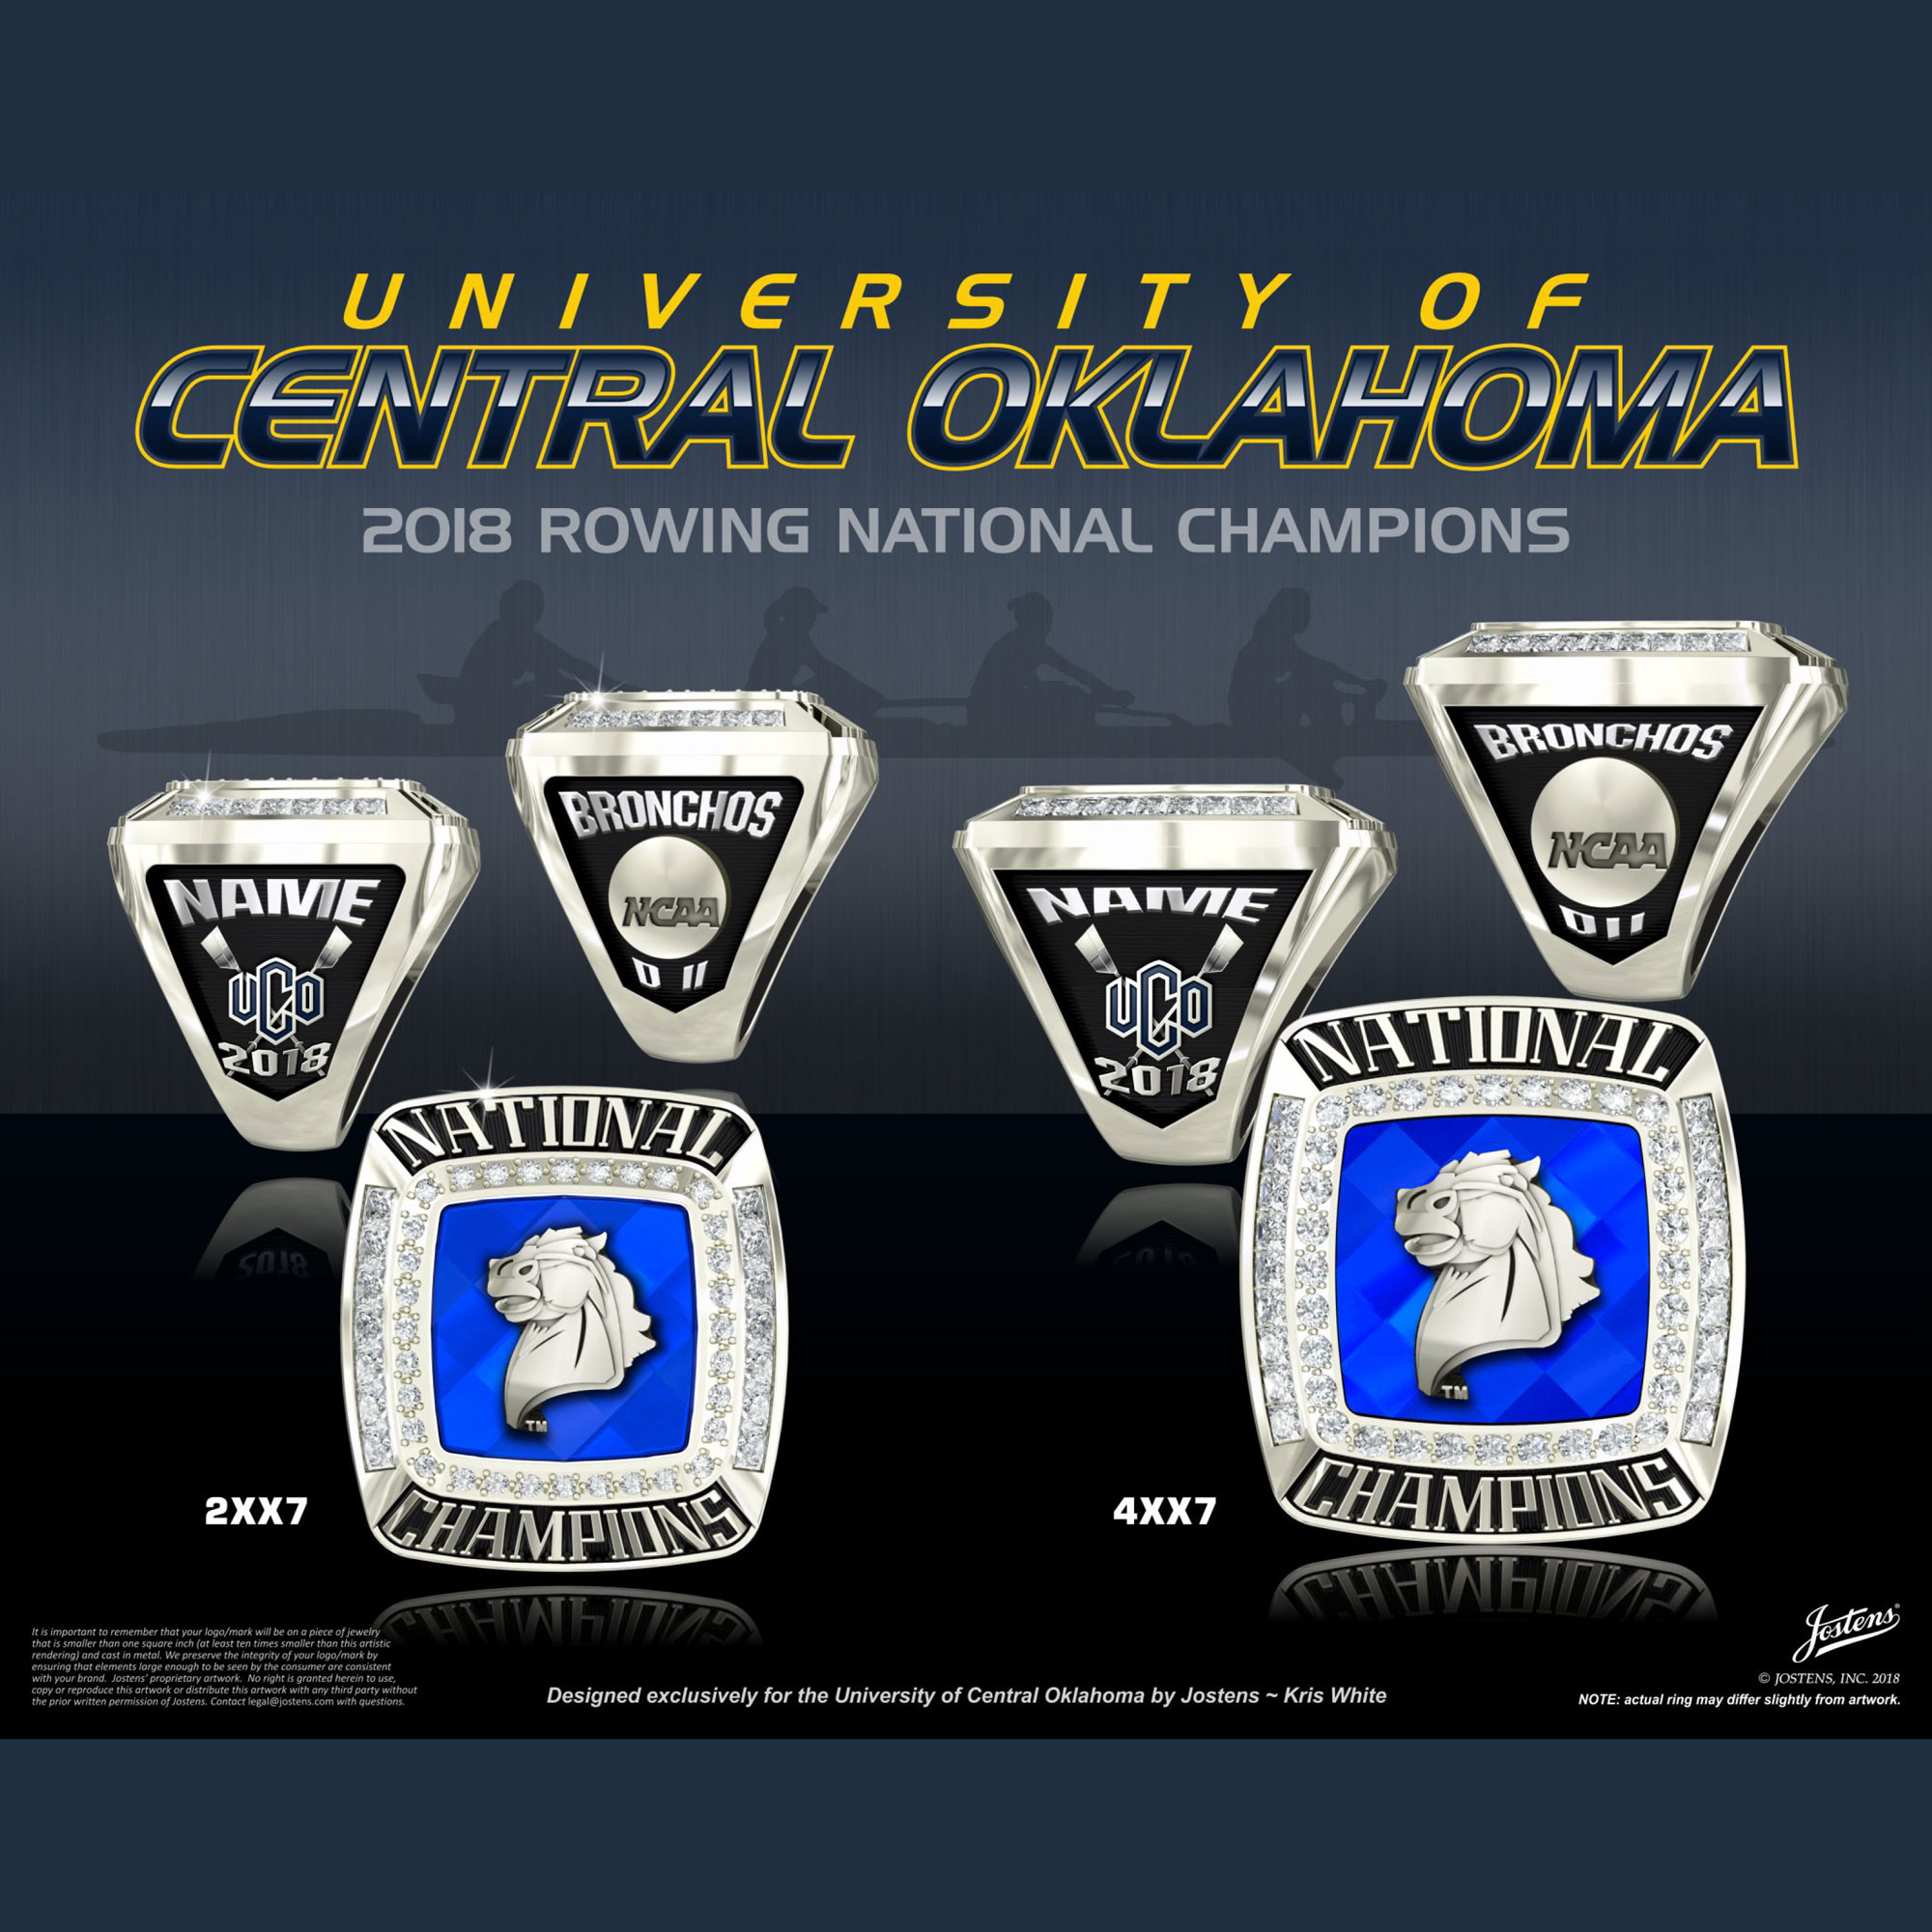 University of Central Oklahoma Women's Rowing 2018 National Championship Ring